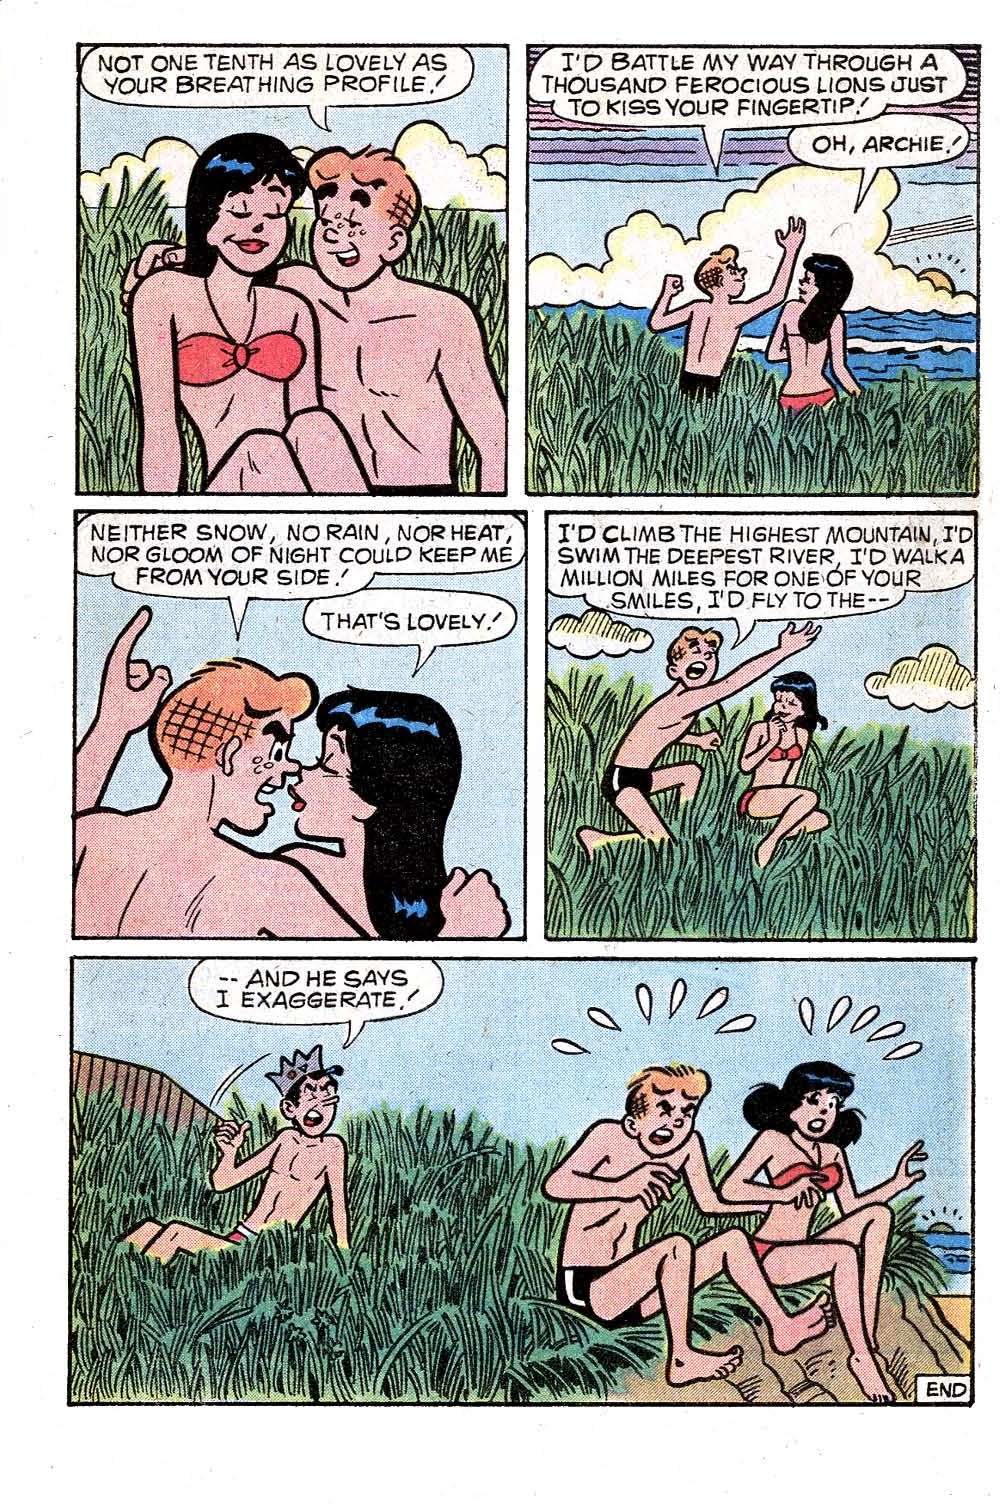 Archie (1960) 275 Page 33